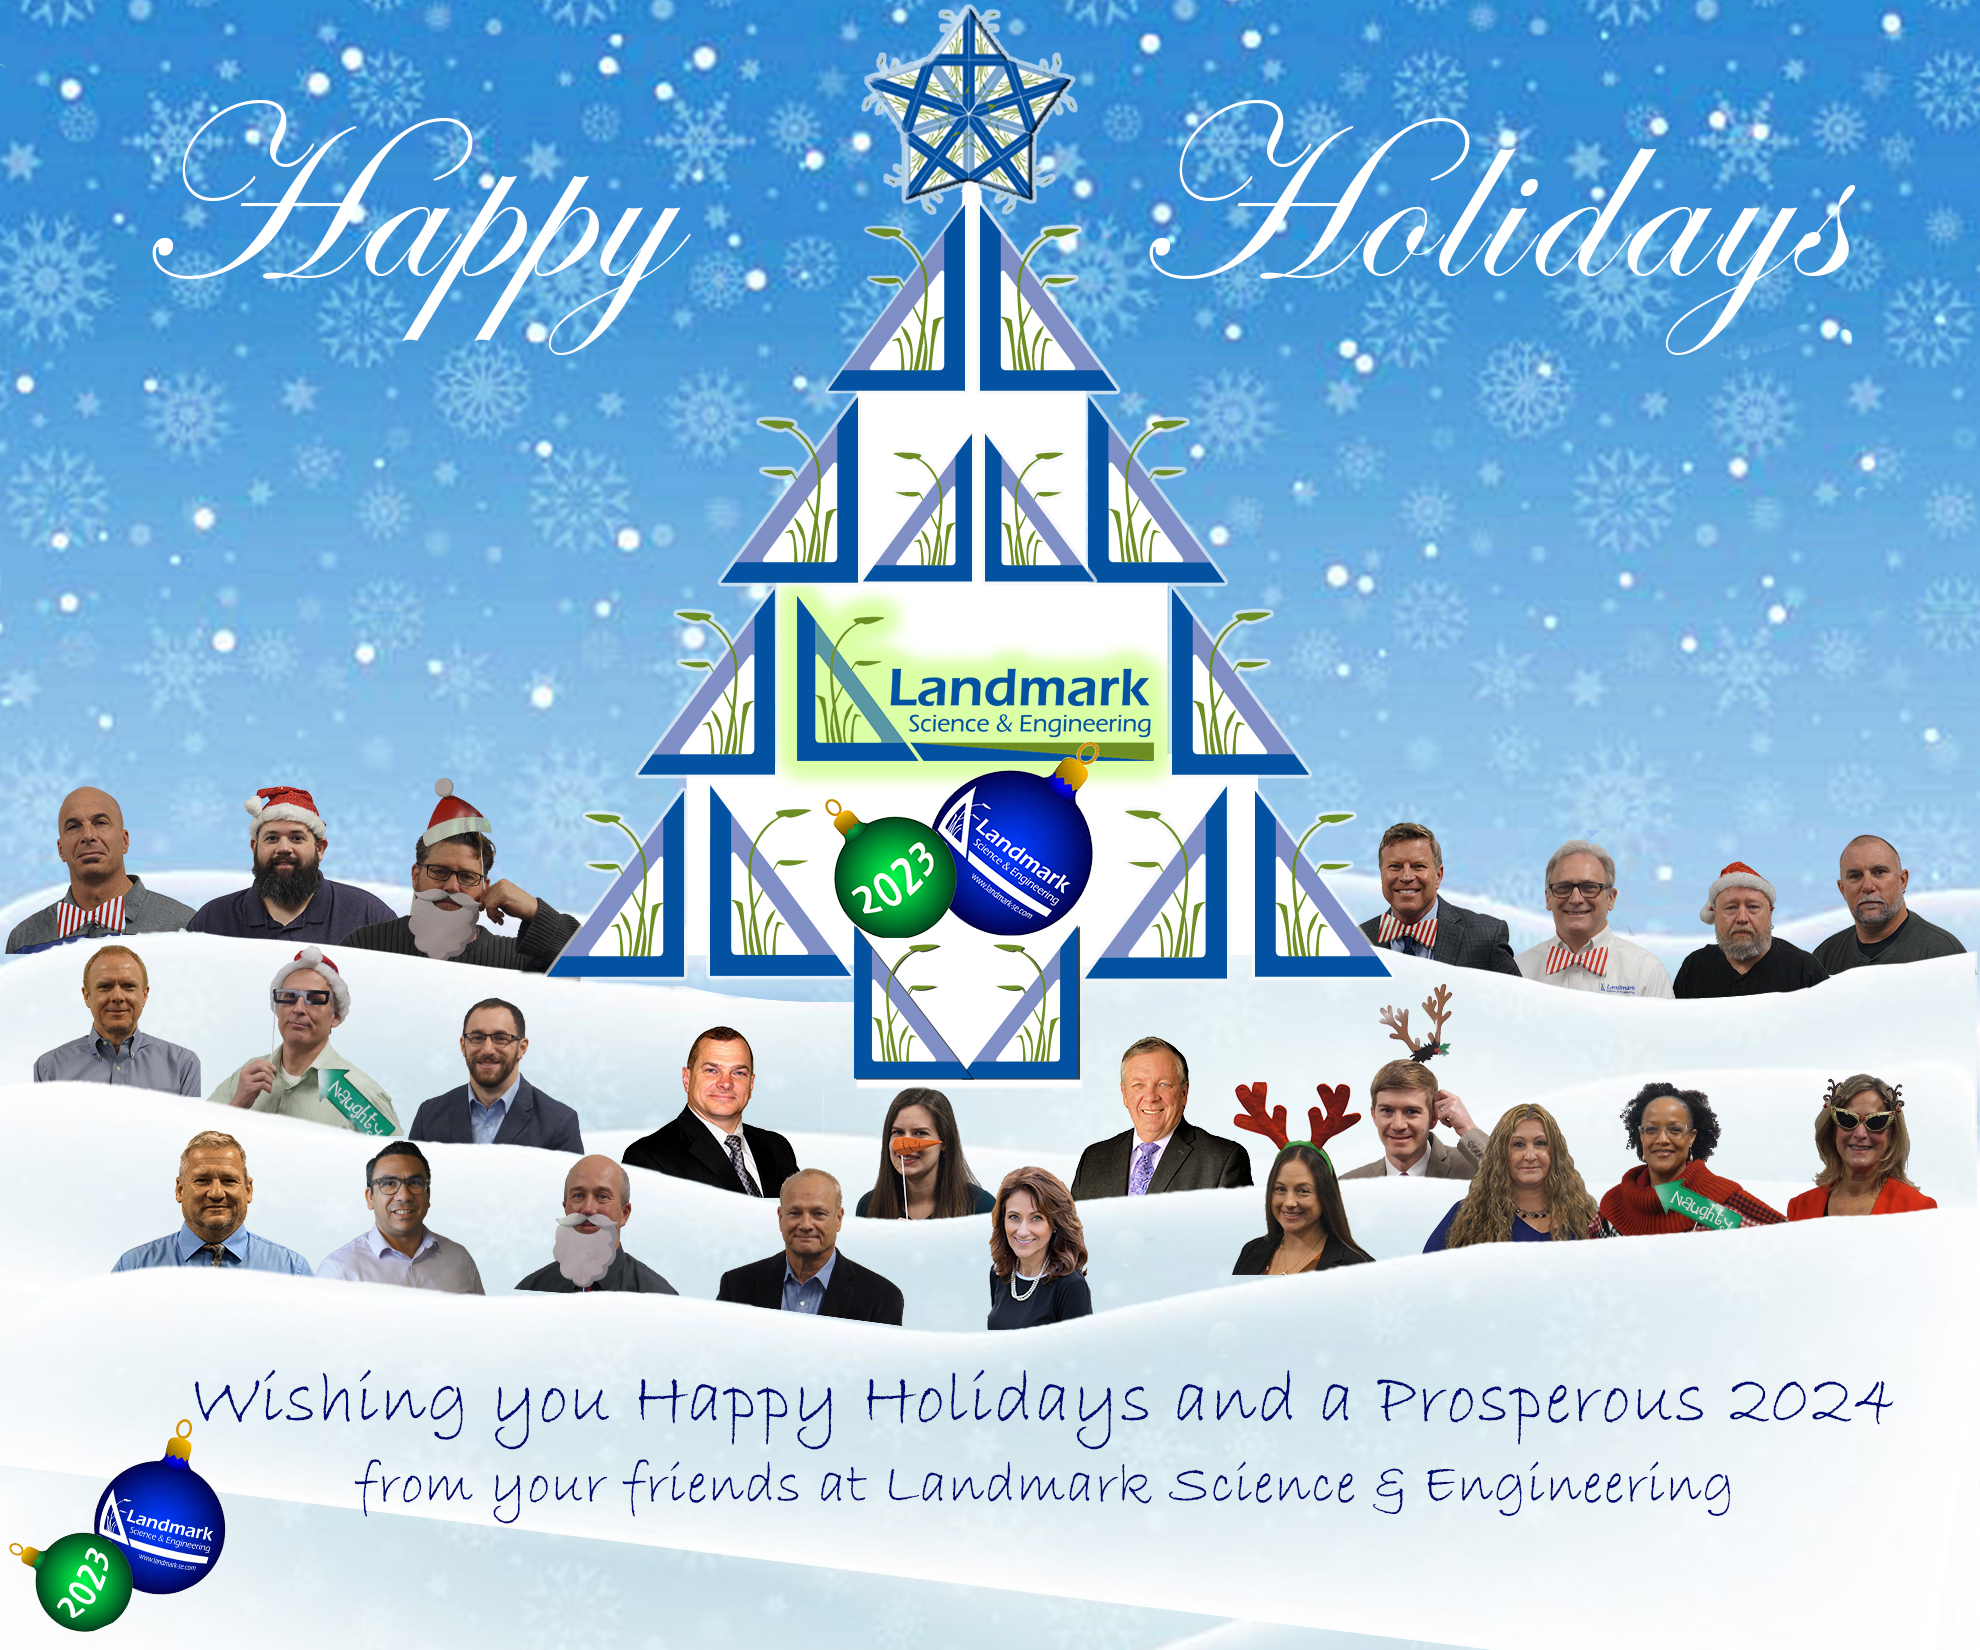 Happy Holidays for all of us at Landmark Science & Engineering